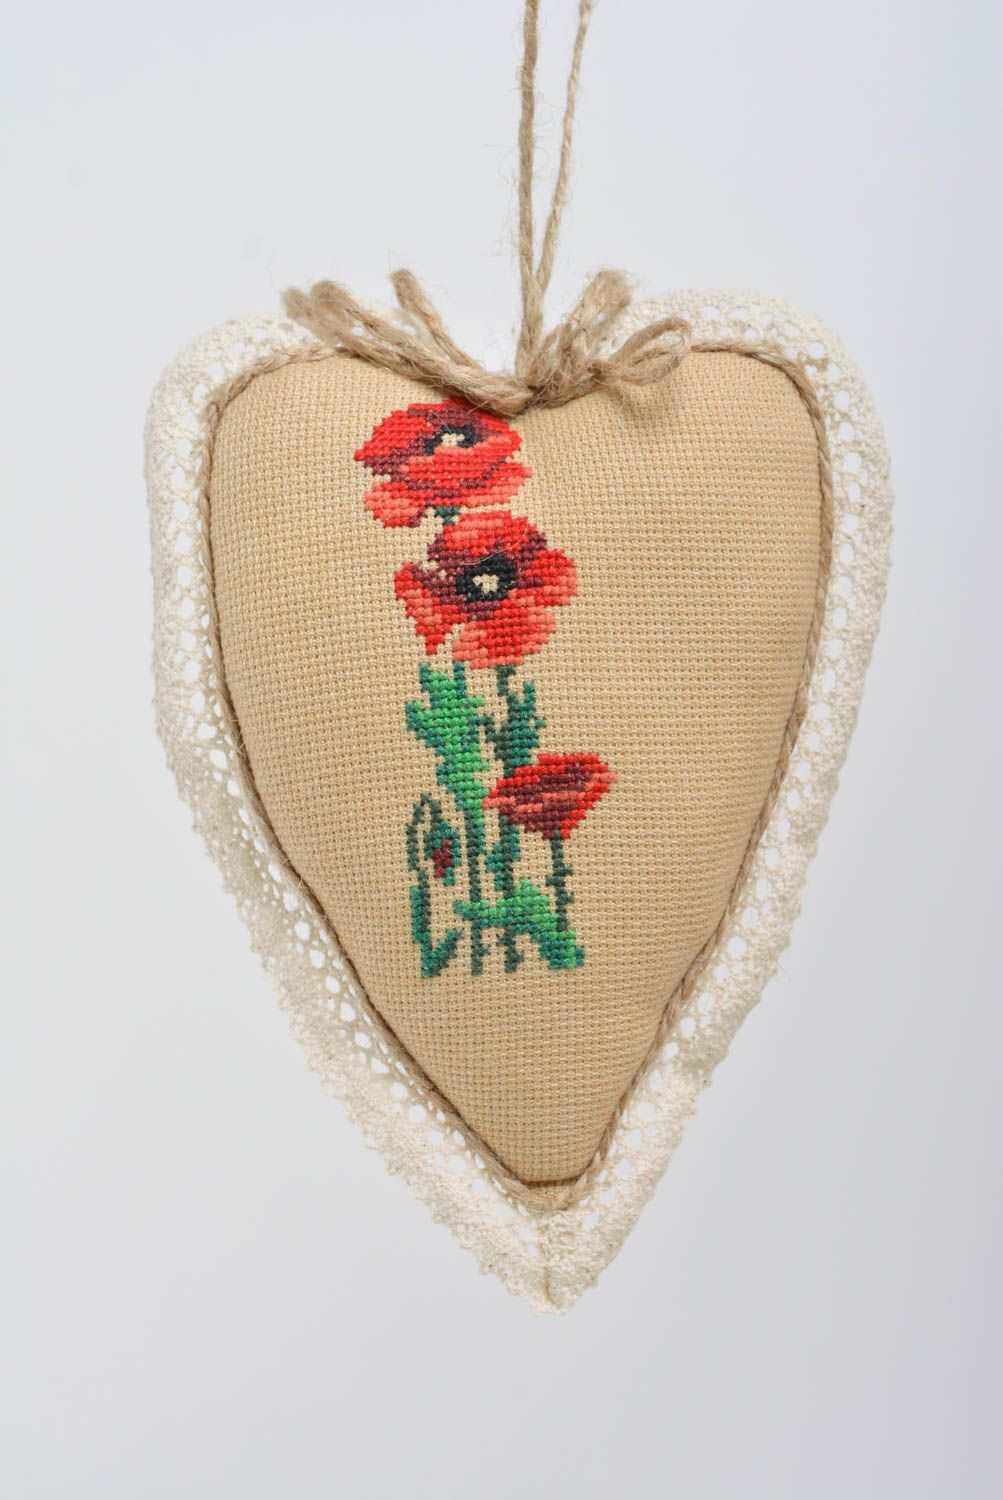 Handmade interior decorative heart-shaped wall hanging with embroidered poppies photo 3